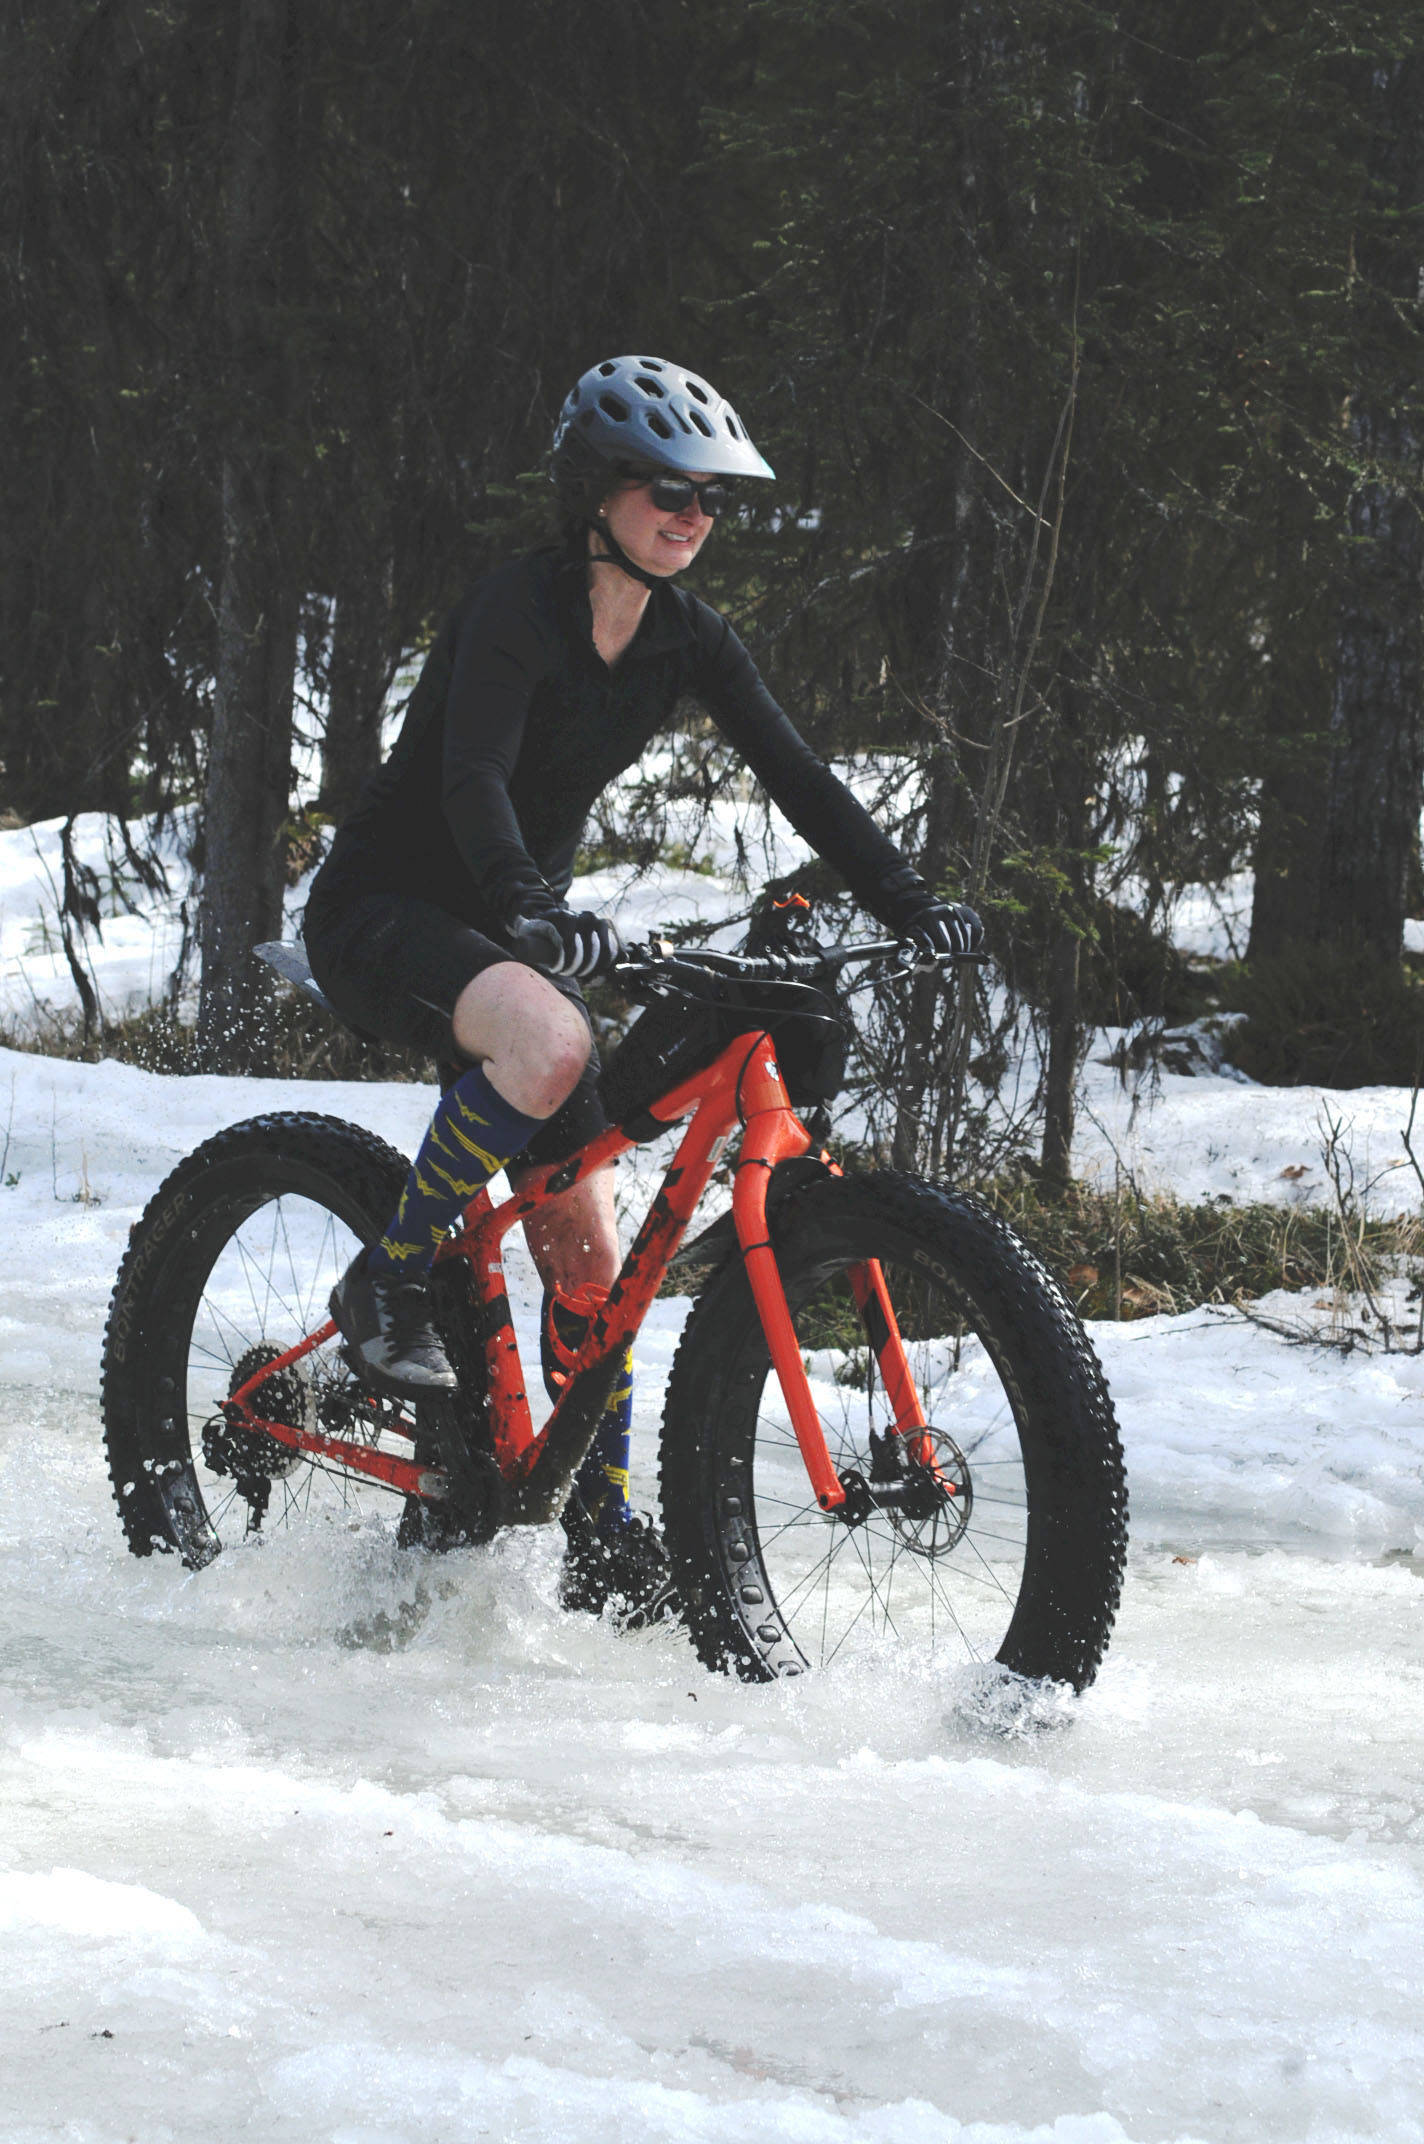 Jen Showalter of Kenai navigates her fatbike through a deep icy puddle on the Wolverine Trail during the 2018 Choose Your Weapon race at Tsalteshi Trails on Sunday, April 15, 2018 in Soldotna, Alaska. Racers completed two 5-kilometer laps around the lower trails by running, biking or skiing, with the option of switching between laps for extra points. Most of the trails had some snow with patches of wet mud sprinkled throughout as spring temperatures begin to dominate the central Kenai Peninsula. (Photo by Elizabeth Earl/Peninsula Clarion)